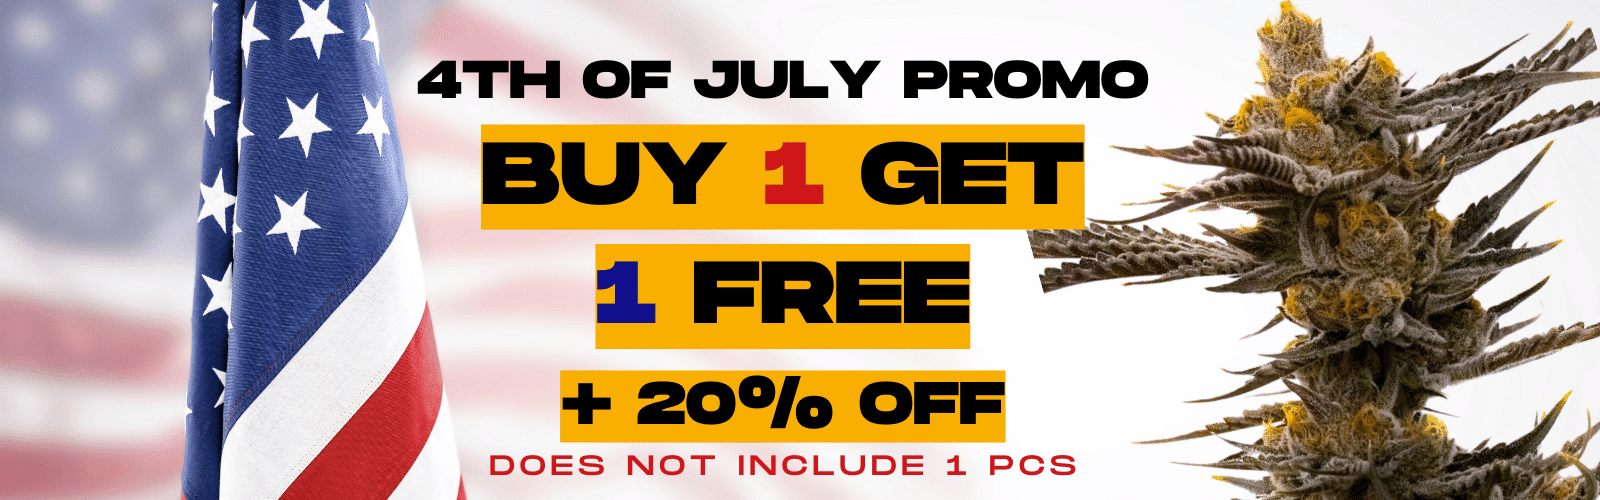 4th of july promo expert seeds